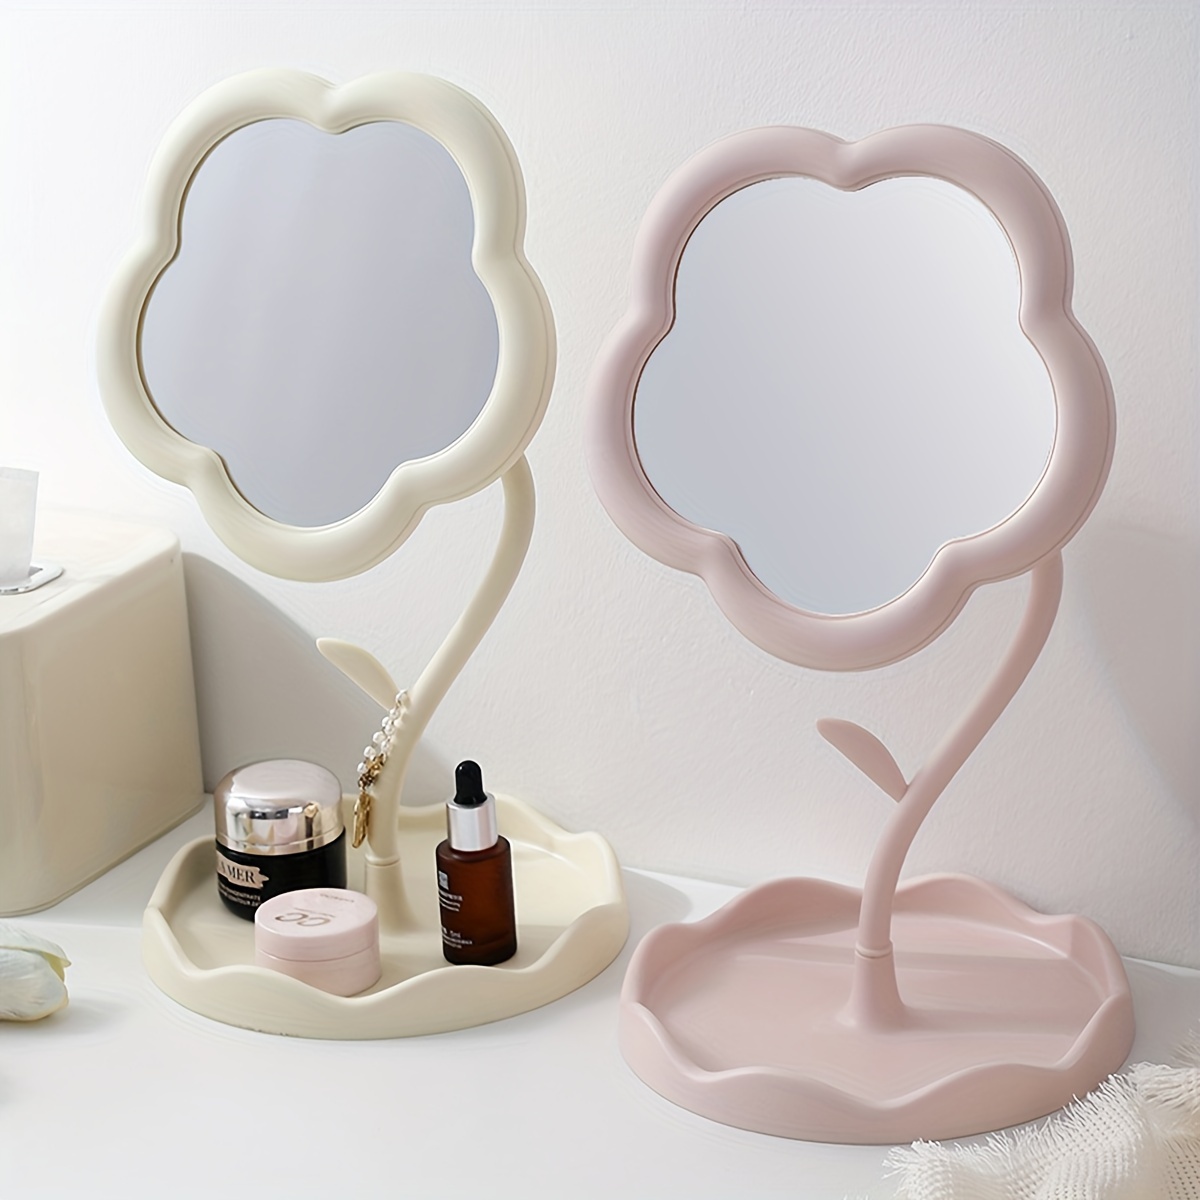 

Flower-shaped Compact Makeup Mirror - Tabletop Mount, Glass Surface, Foldable Design, Polished Finish, Unscented Plastic Frame - Portable Vanity Mirror For Bedroom, Dorm, Travel - No Battery Required